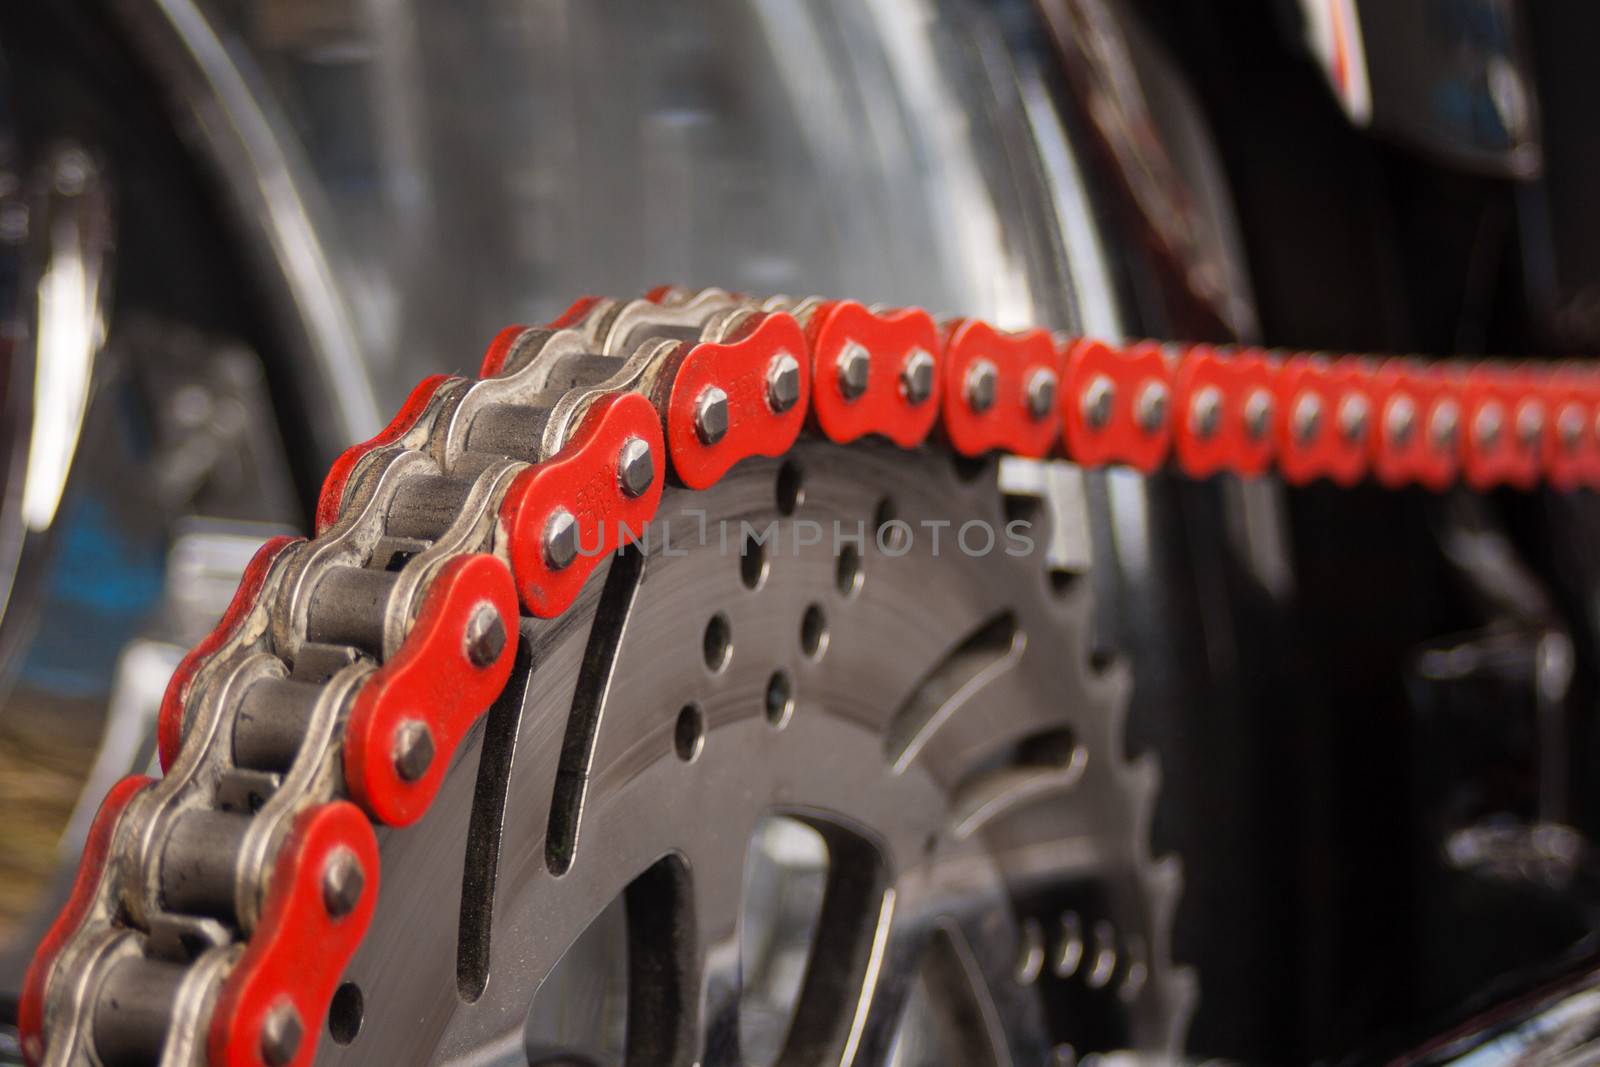 Motorcycle chain and sprocket in detail.